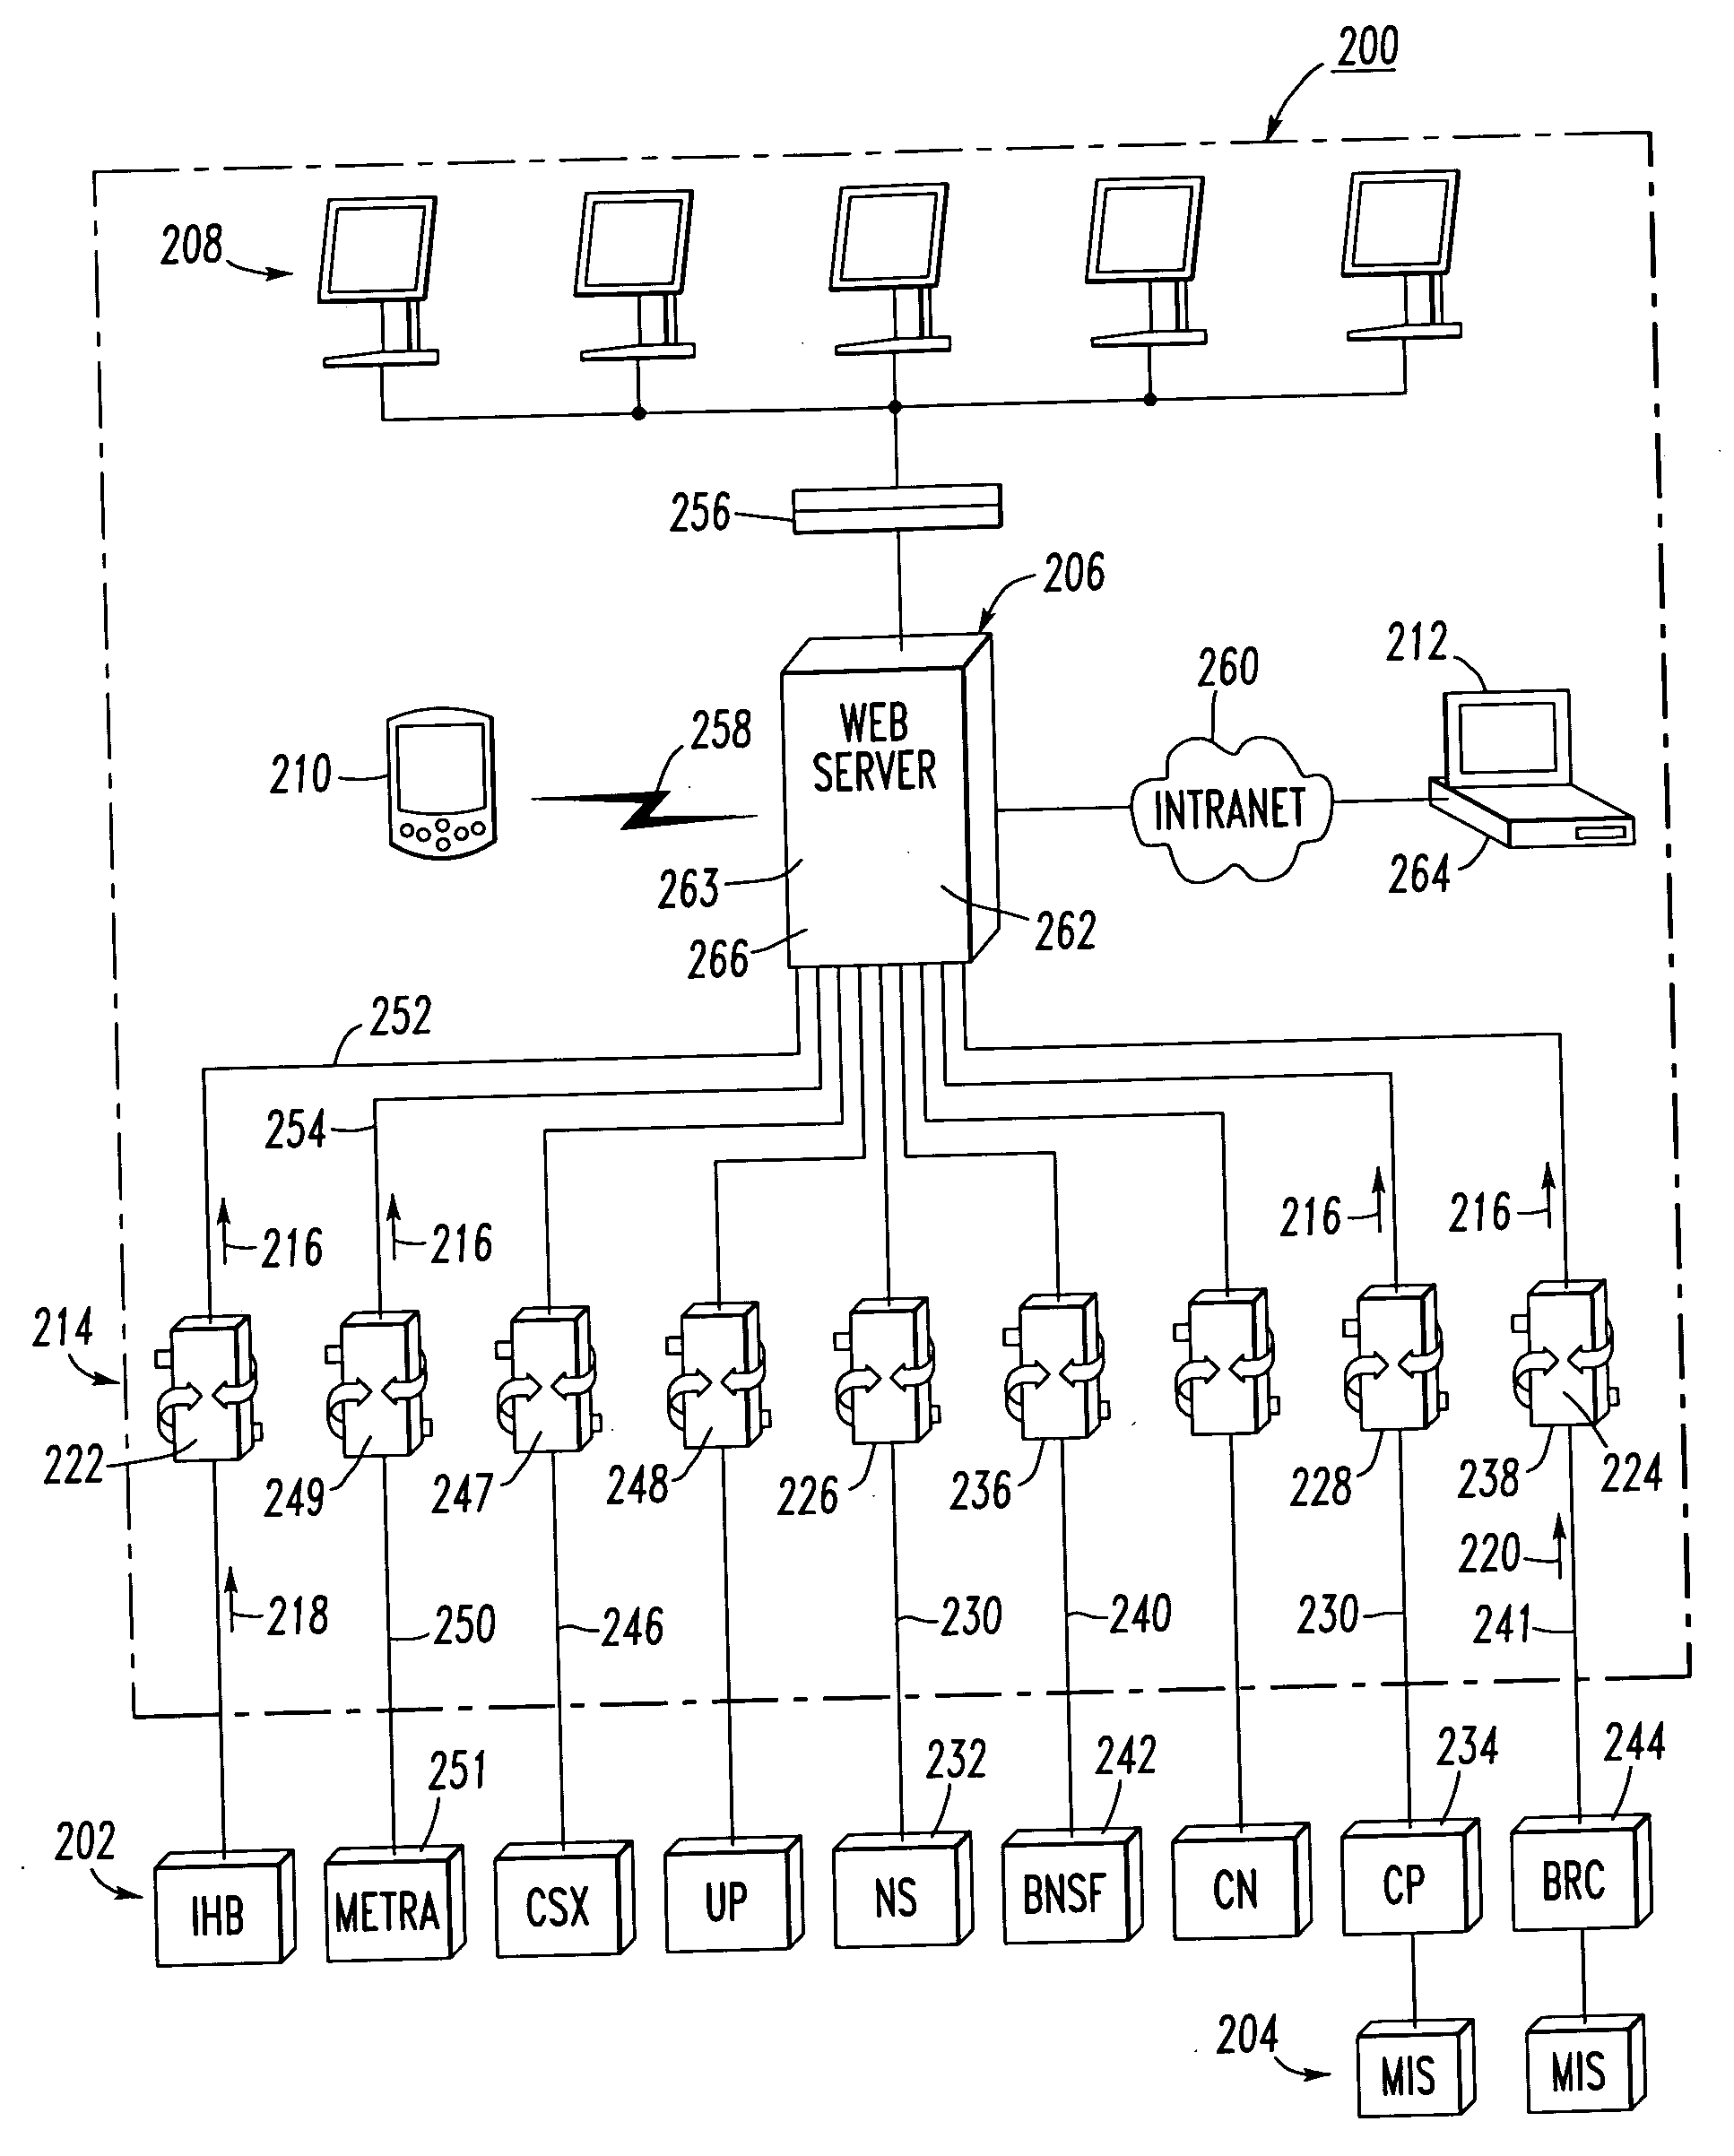 User interface for railroad dispatch monitoring of a geographic region and display system employing a common data format for displaying information from different and diverse railroad CAD systems